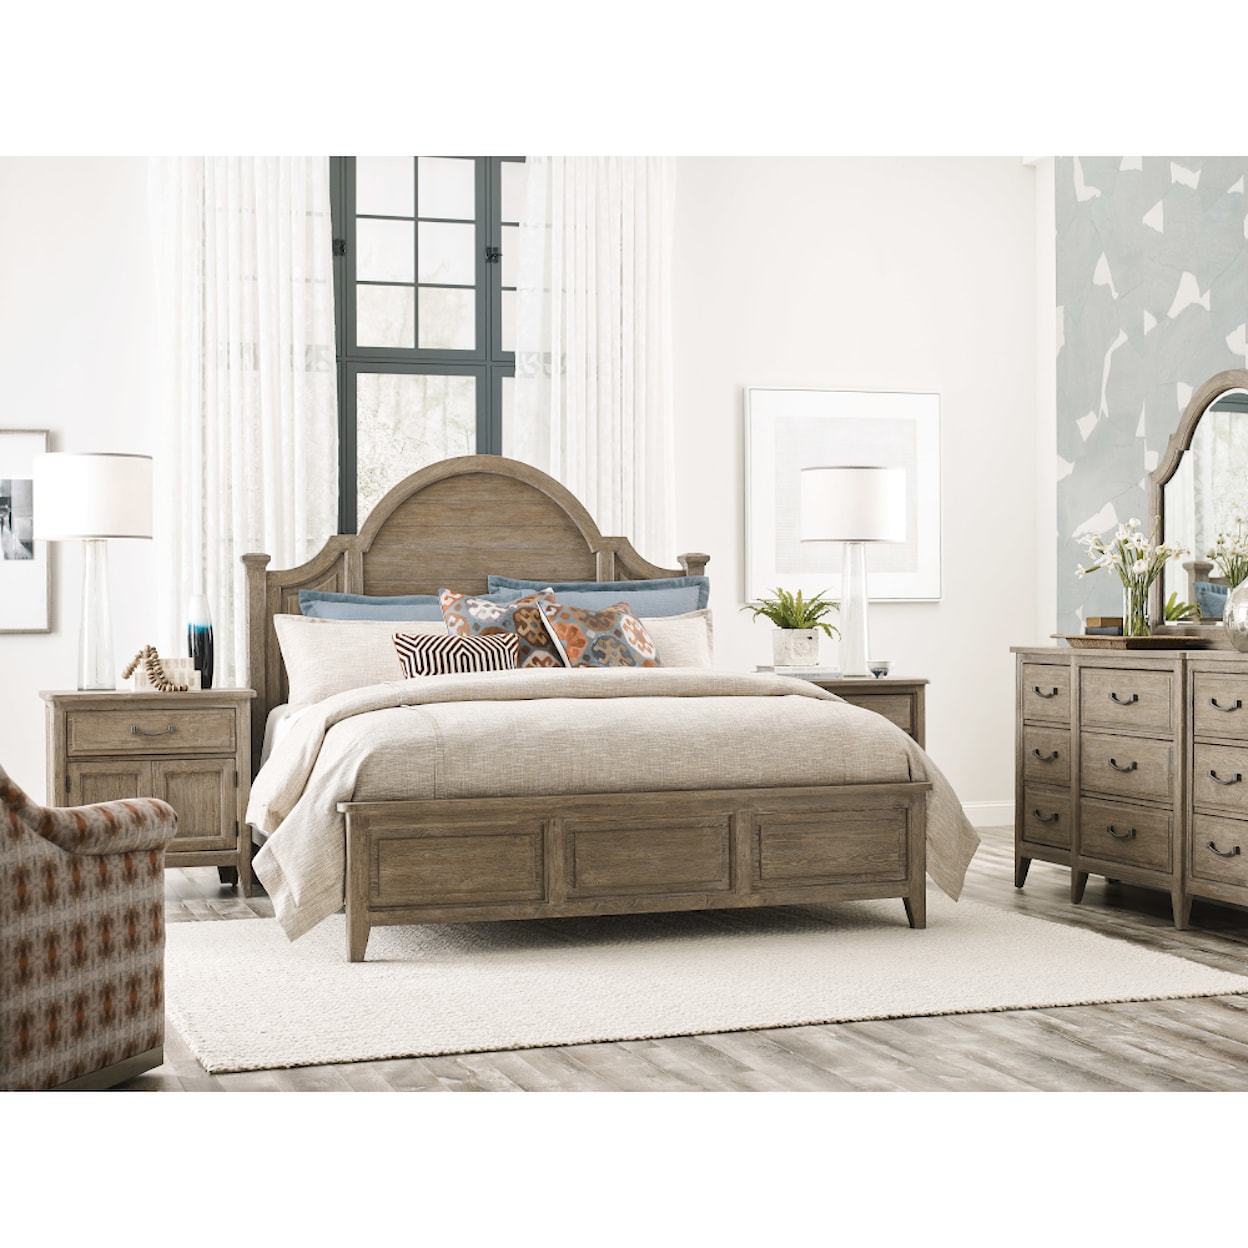 Kincaid Furniture Urban Cottage Allegheny King Panel Bed